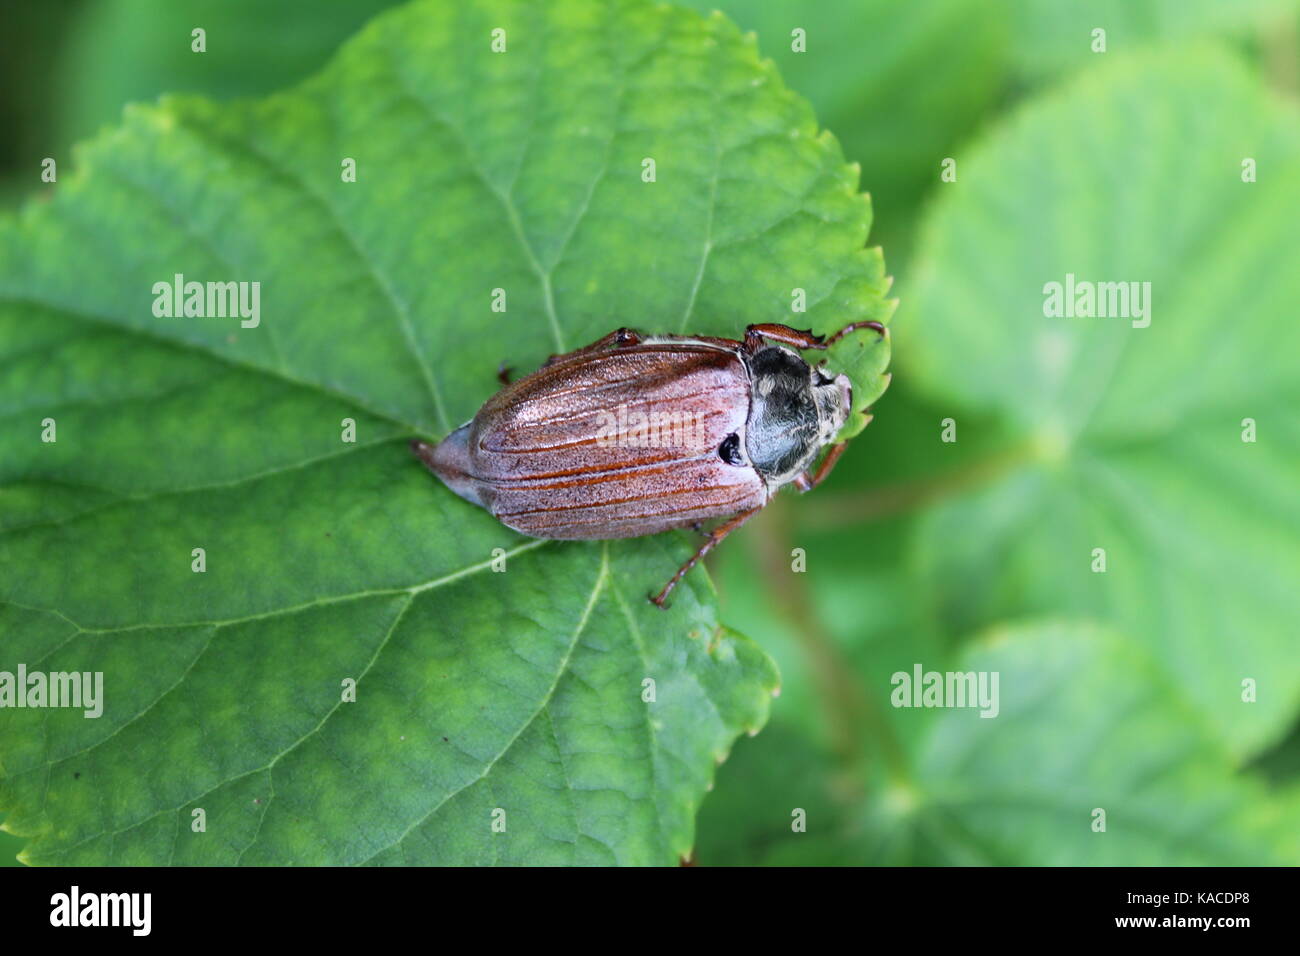 Chafer (also called 'May bug') enjoys a succulent leaf and not notice crept photographer! Stock Photo